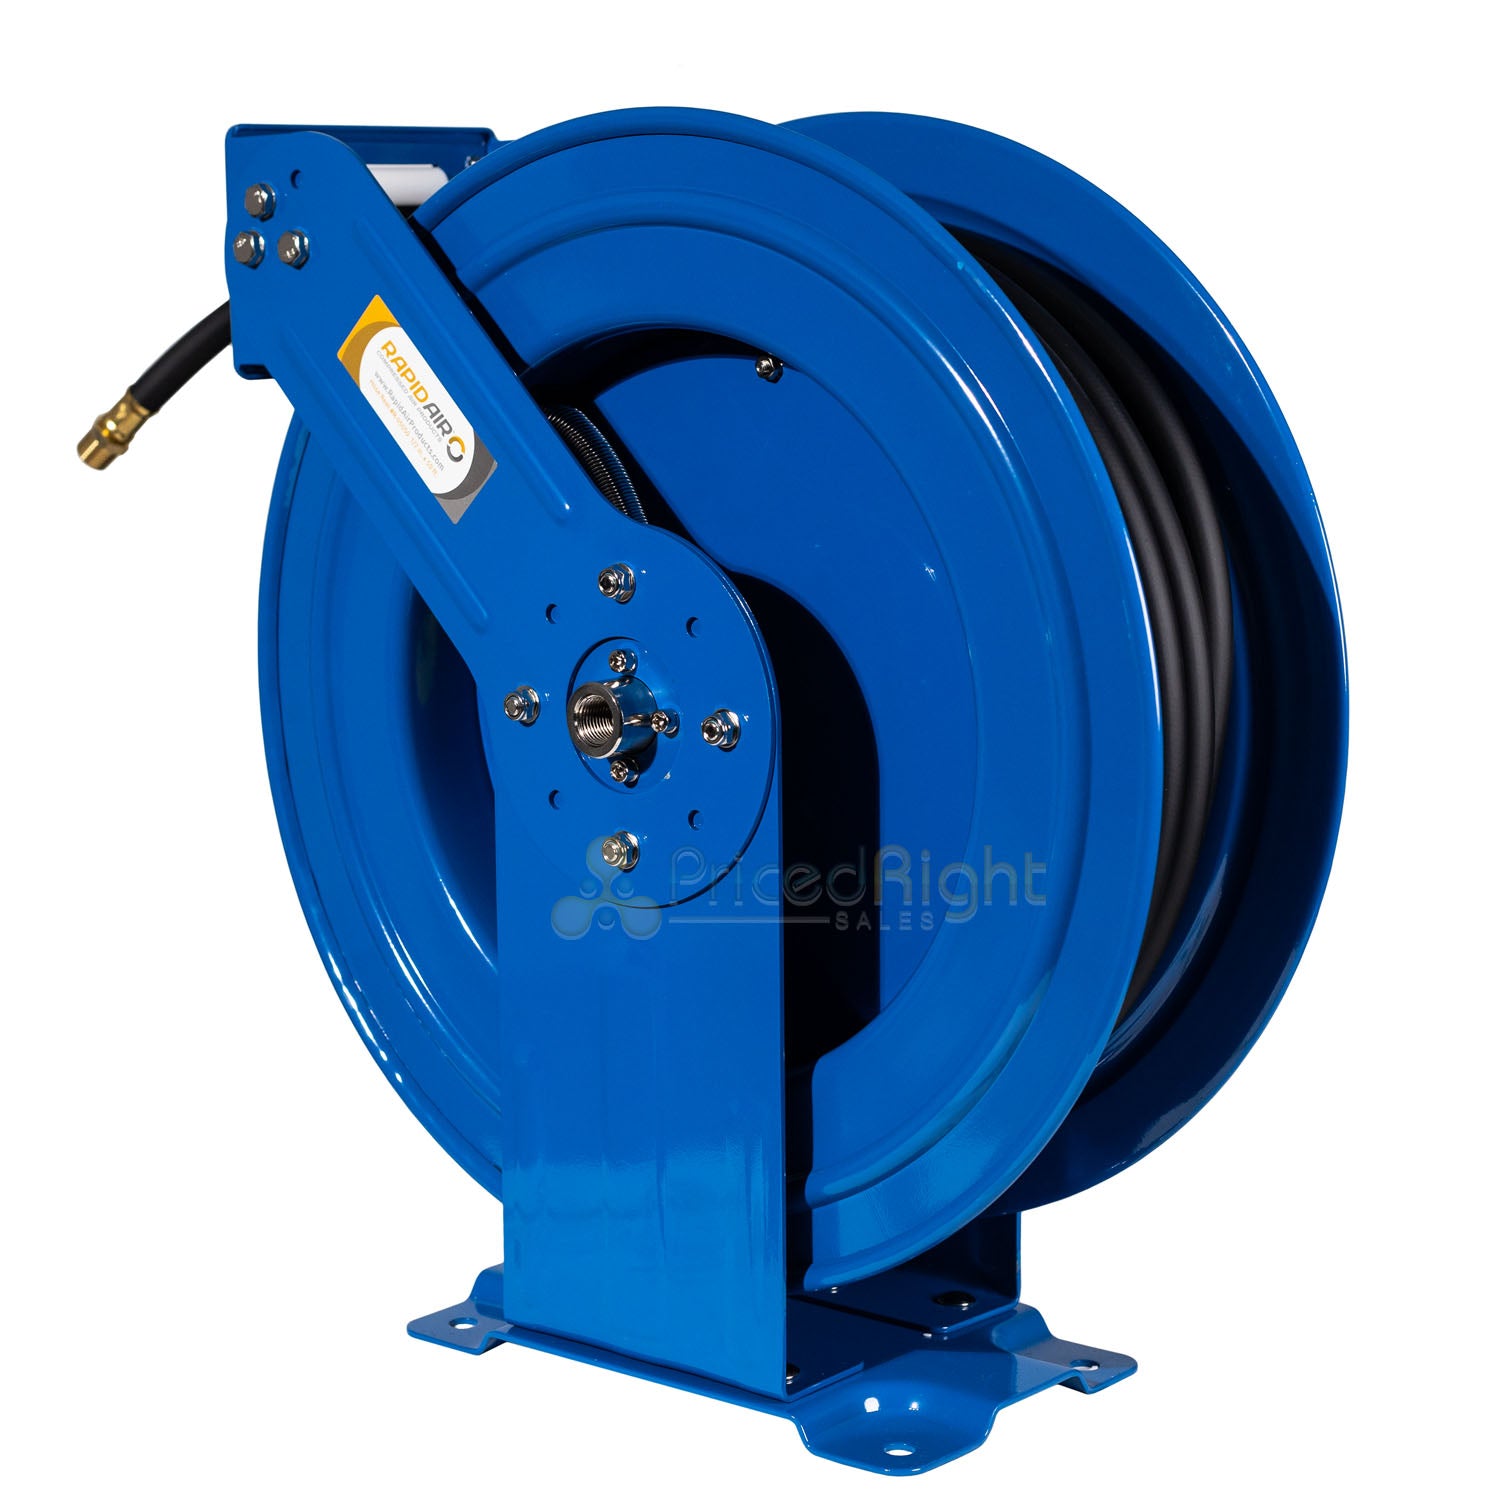 Rapidair 1/2" x 50' Dual Arm Steel Hose Reel 1/2" Inlet and Outlet R-05050